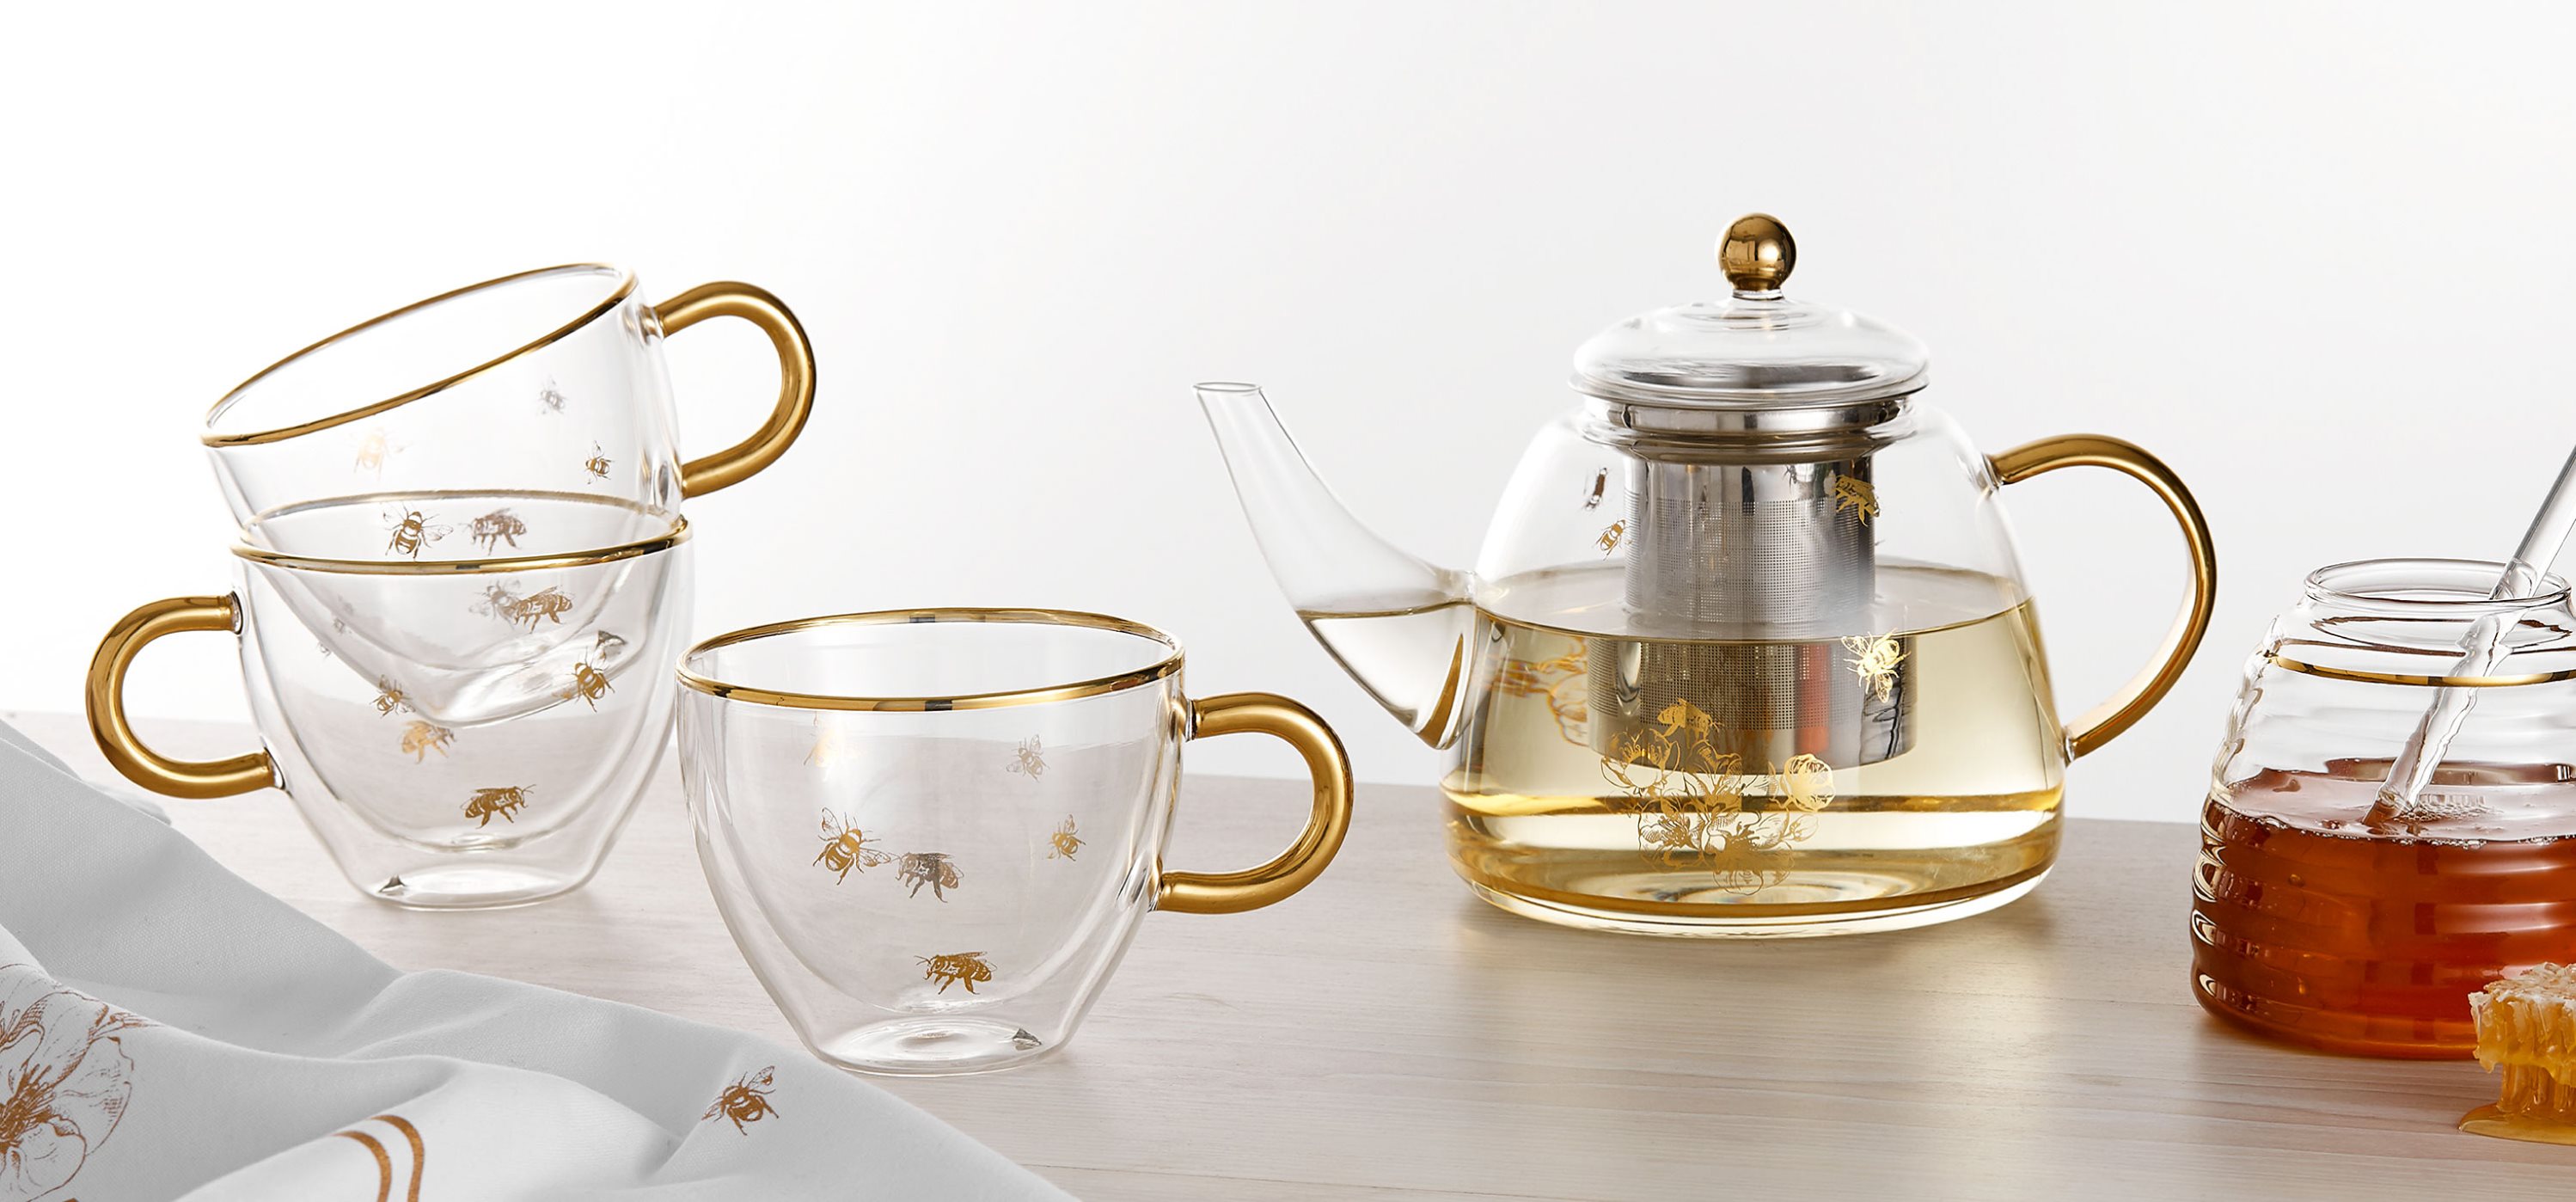 Up to 60% OFF on teaware and gifts at The Tea Centre